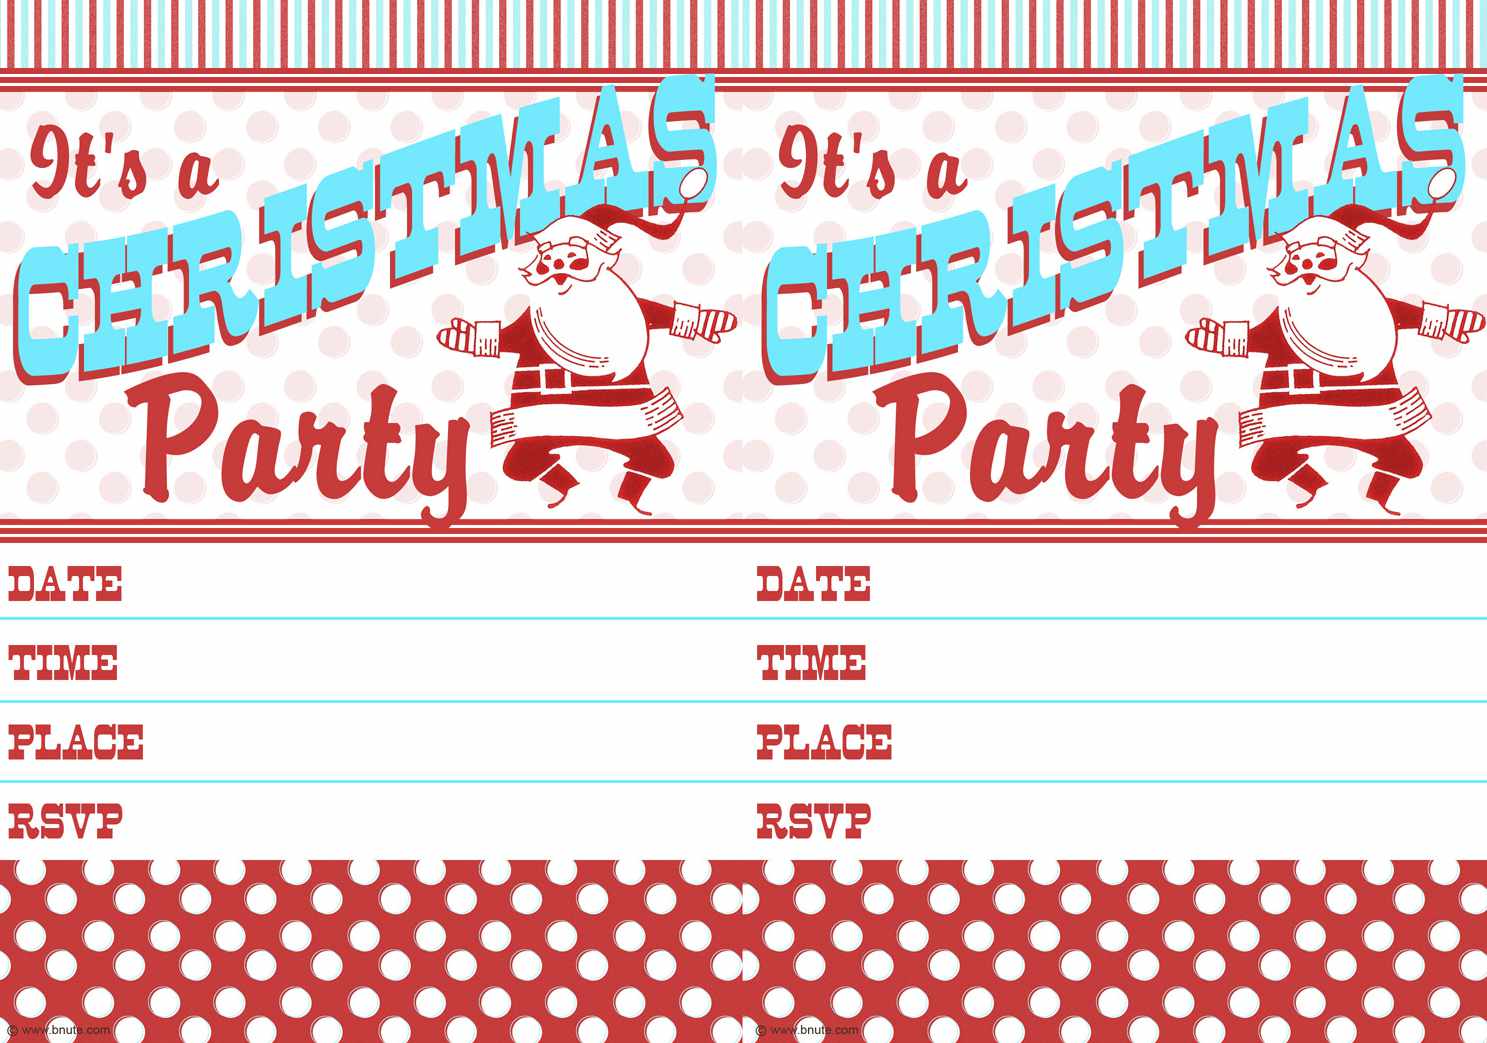 12 Free Christmas Party Invitations That You Can Print.